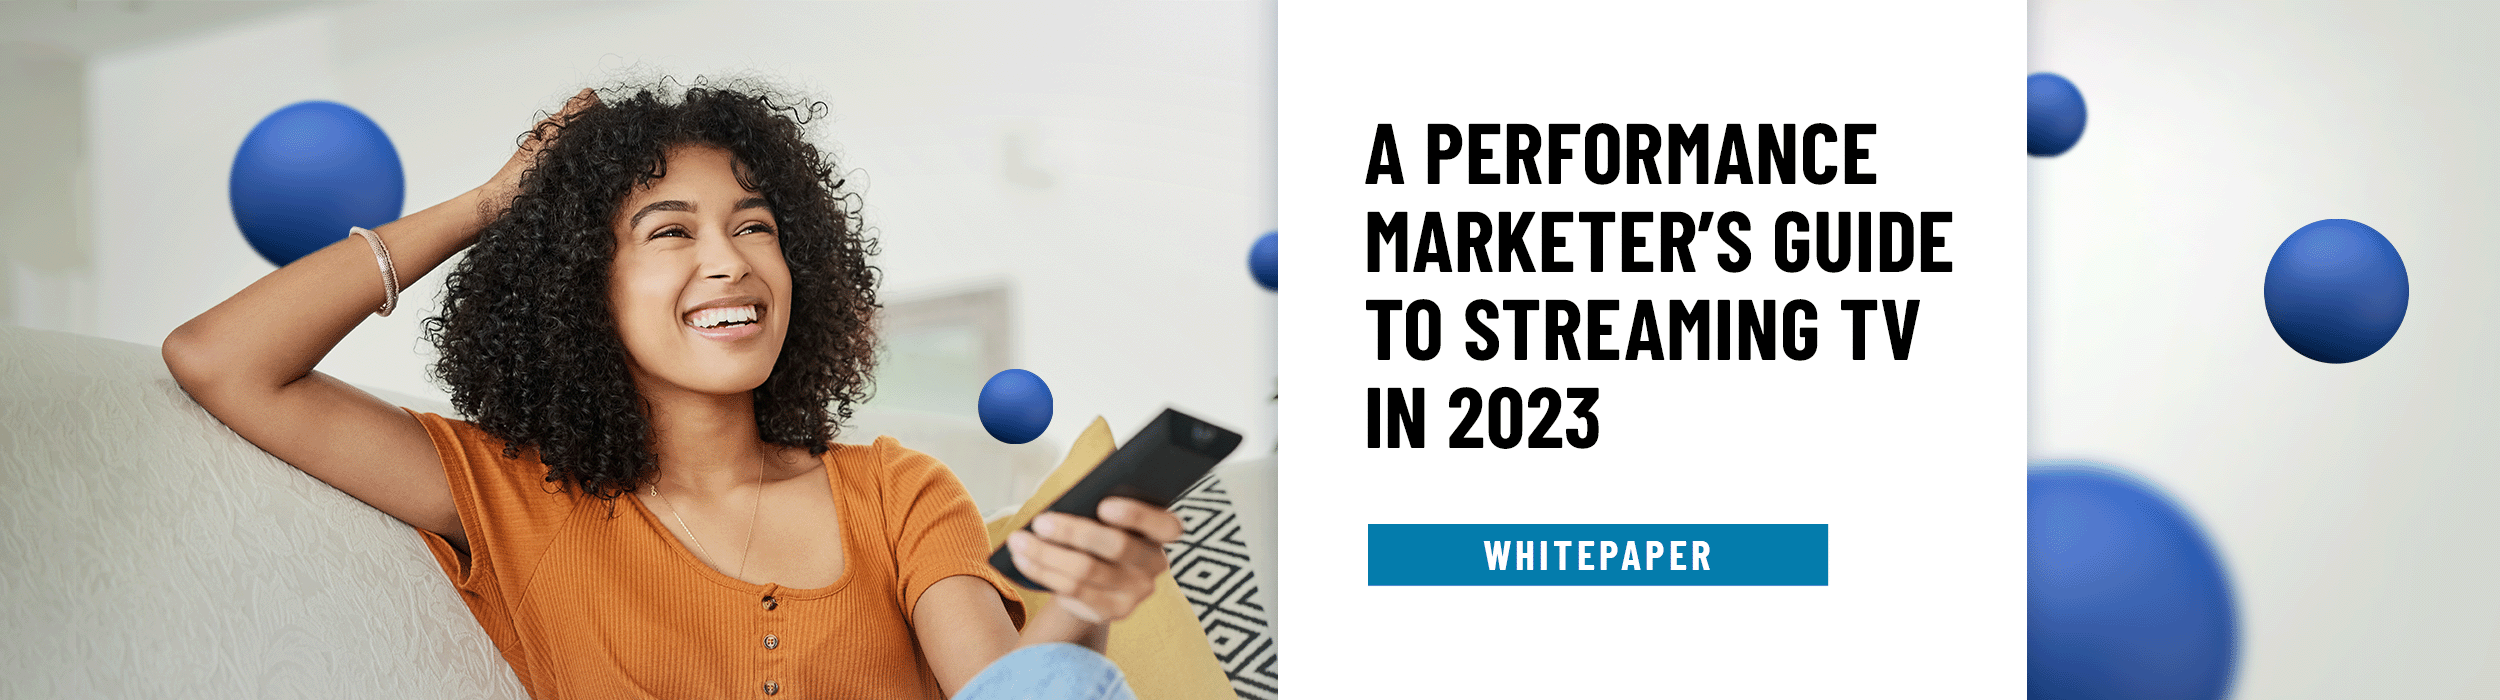 A Performance Marketer's Guide to Streaming TV in 2023